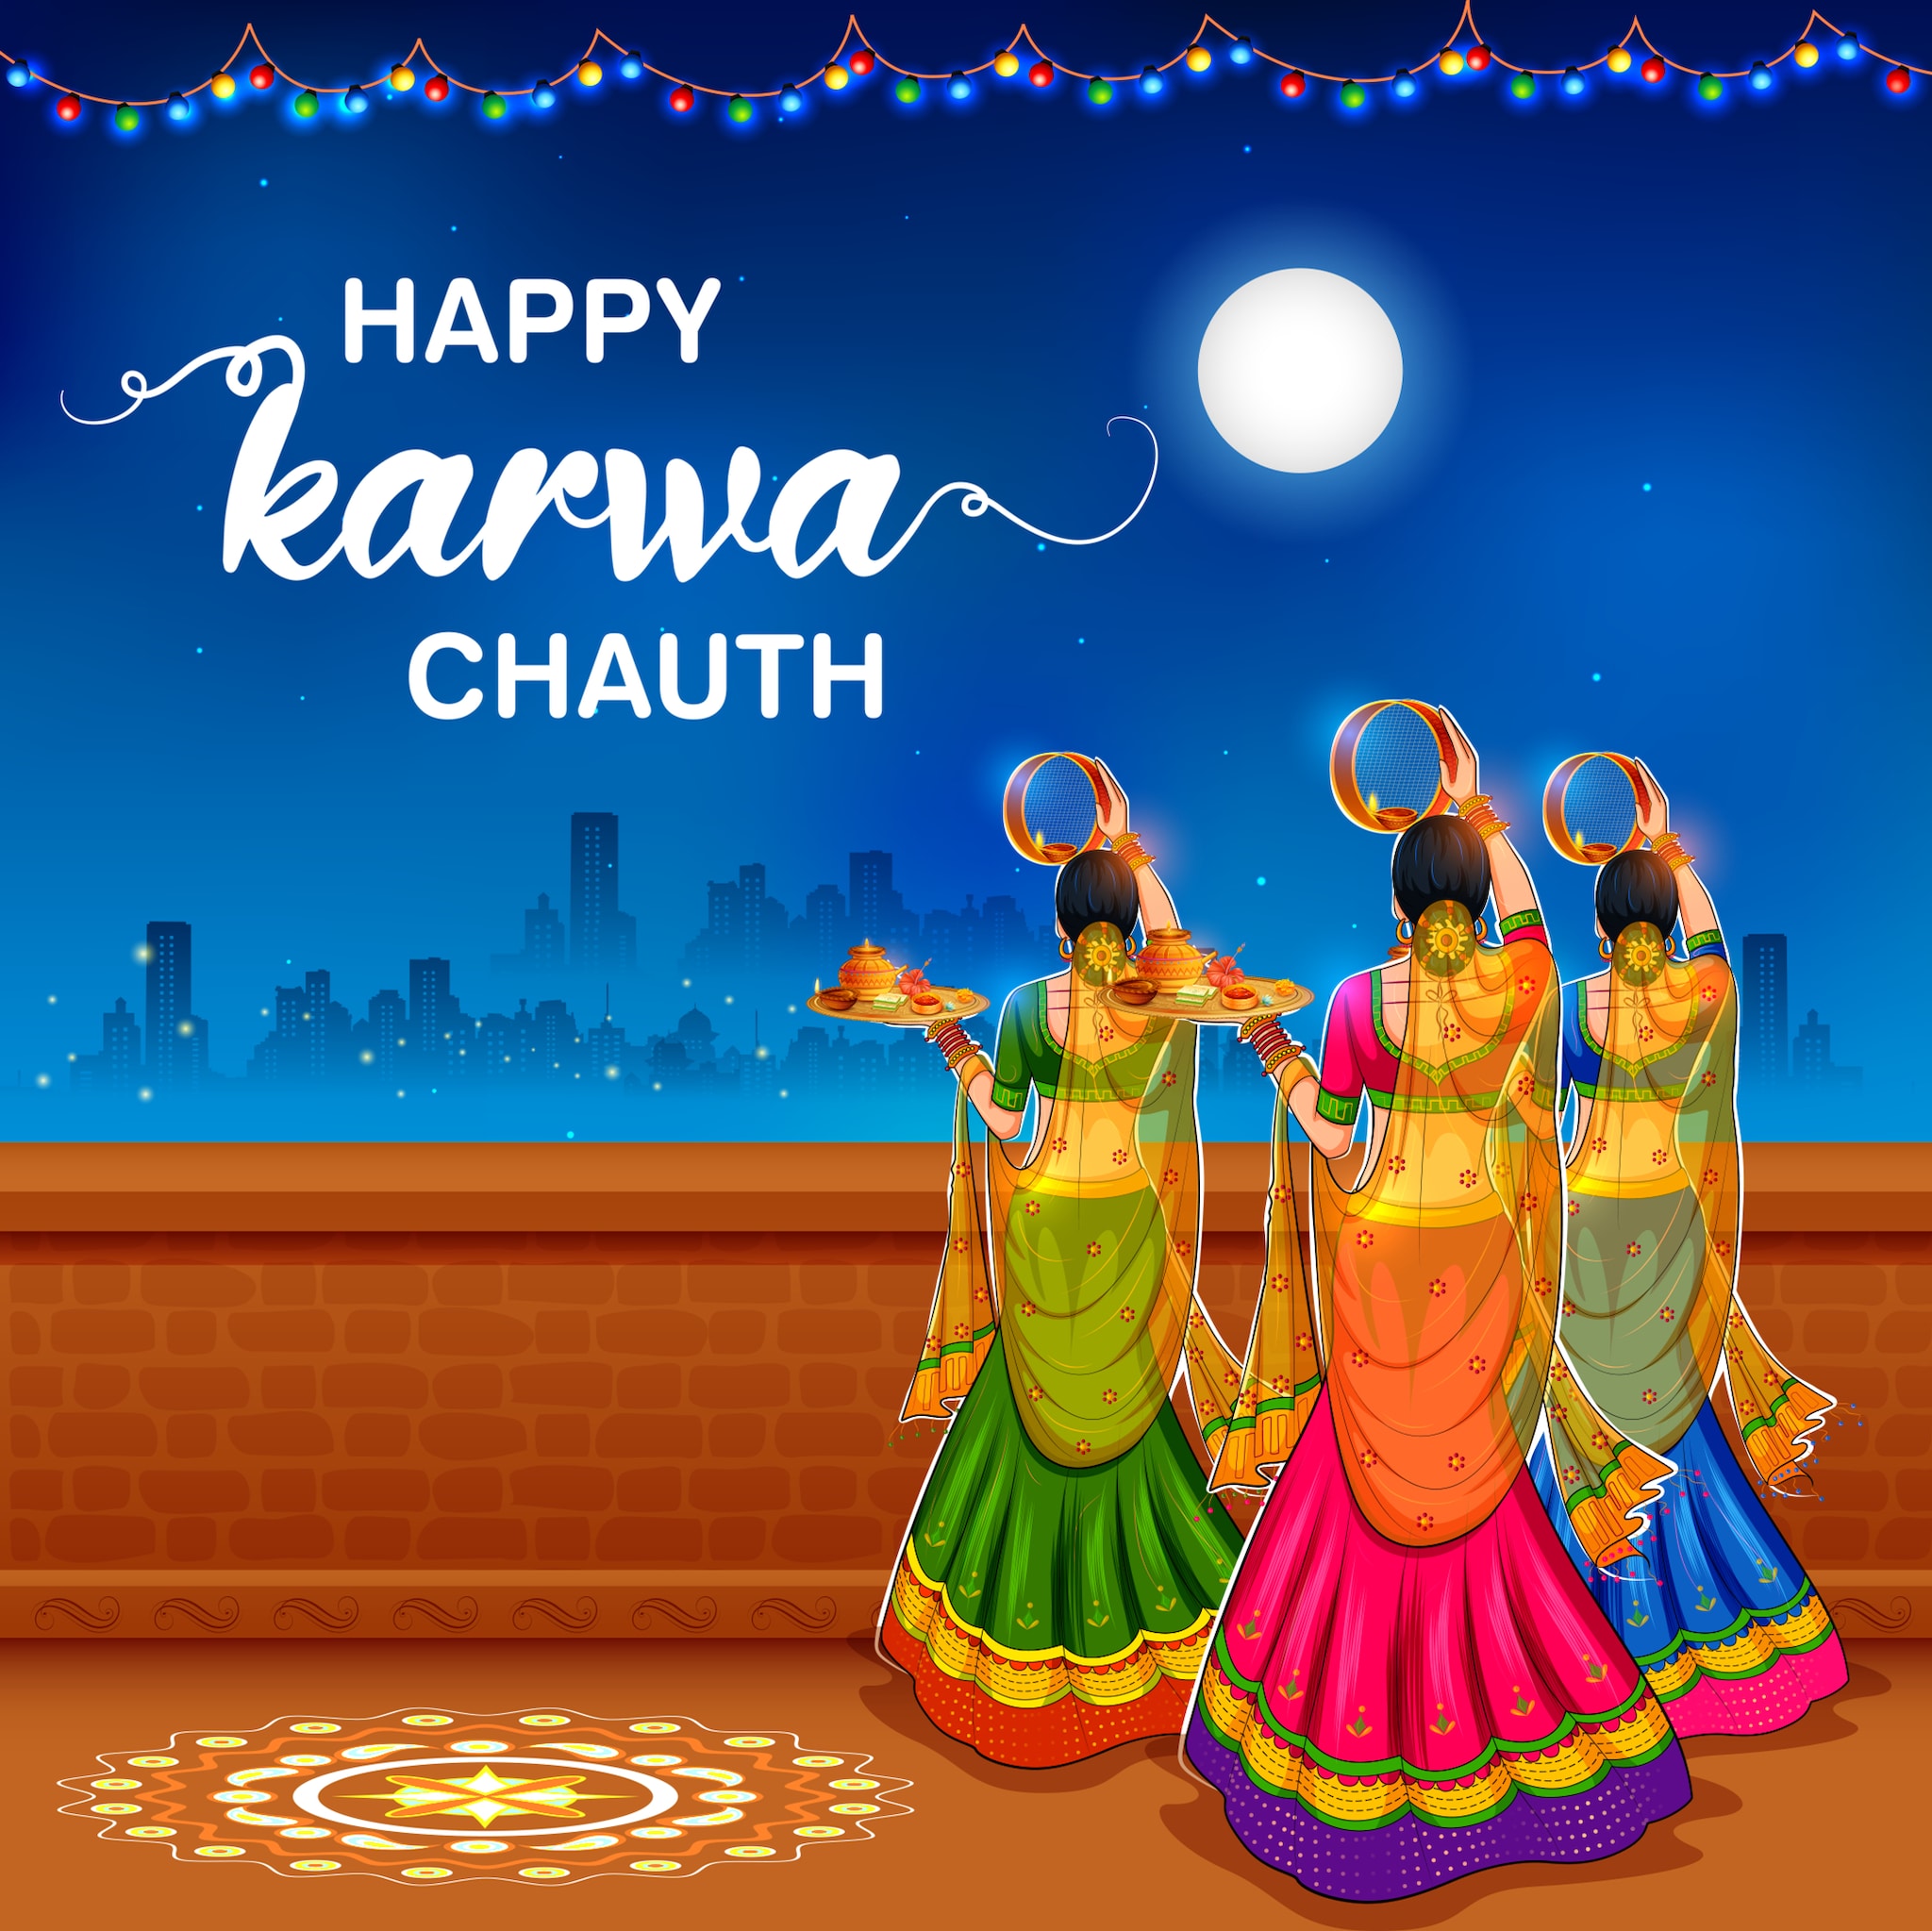 Happy Karva Chauth 2022 Wishes, Greetings, WhatsApp Status, Images and Quotes that you can share with your loved ones.  (Image: Shutterstock) 